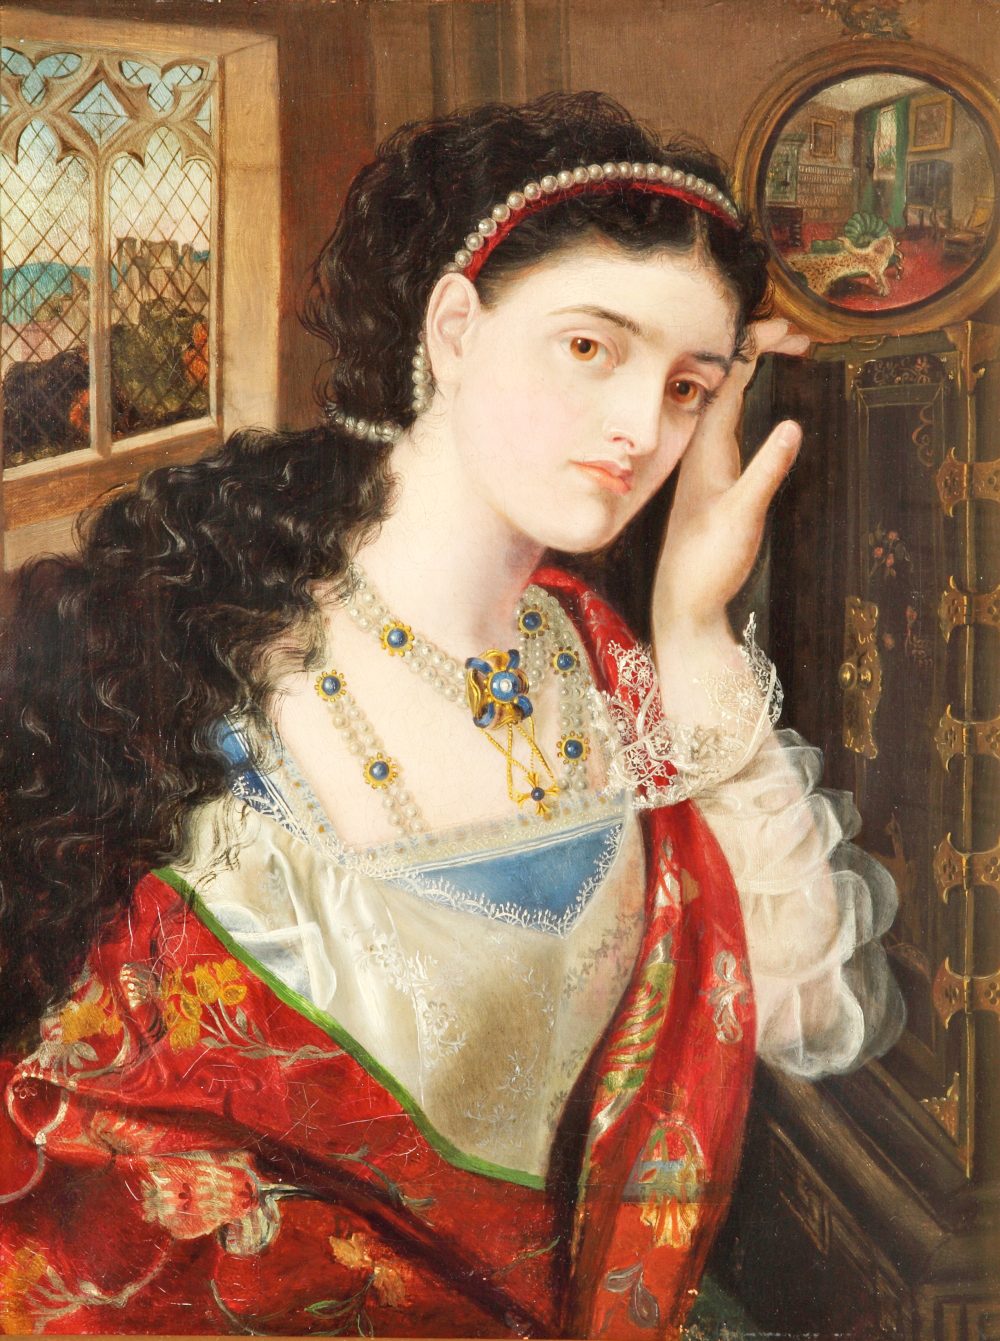 The painting shows a woman in a red dress. She has very fair skin and long, dark hair. She is looking at something in the distance, and her face is sad. The room she is in is elegant.